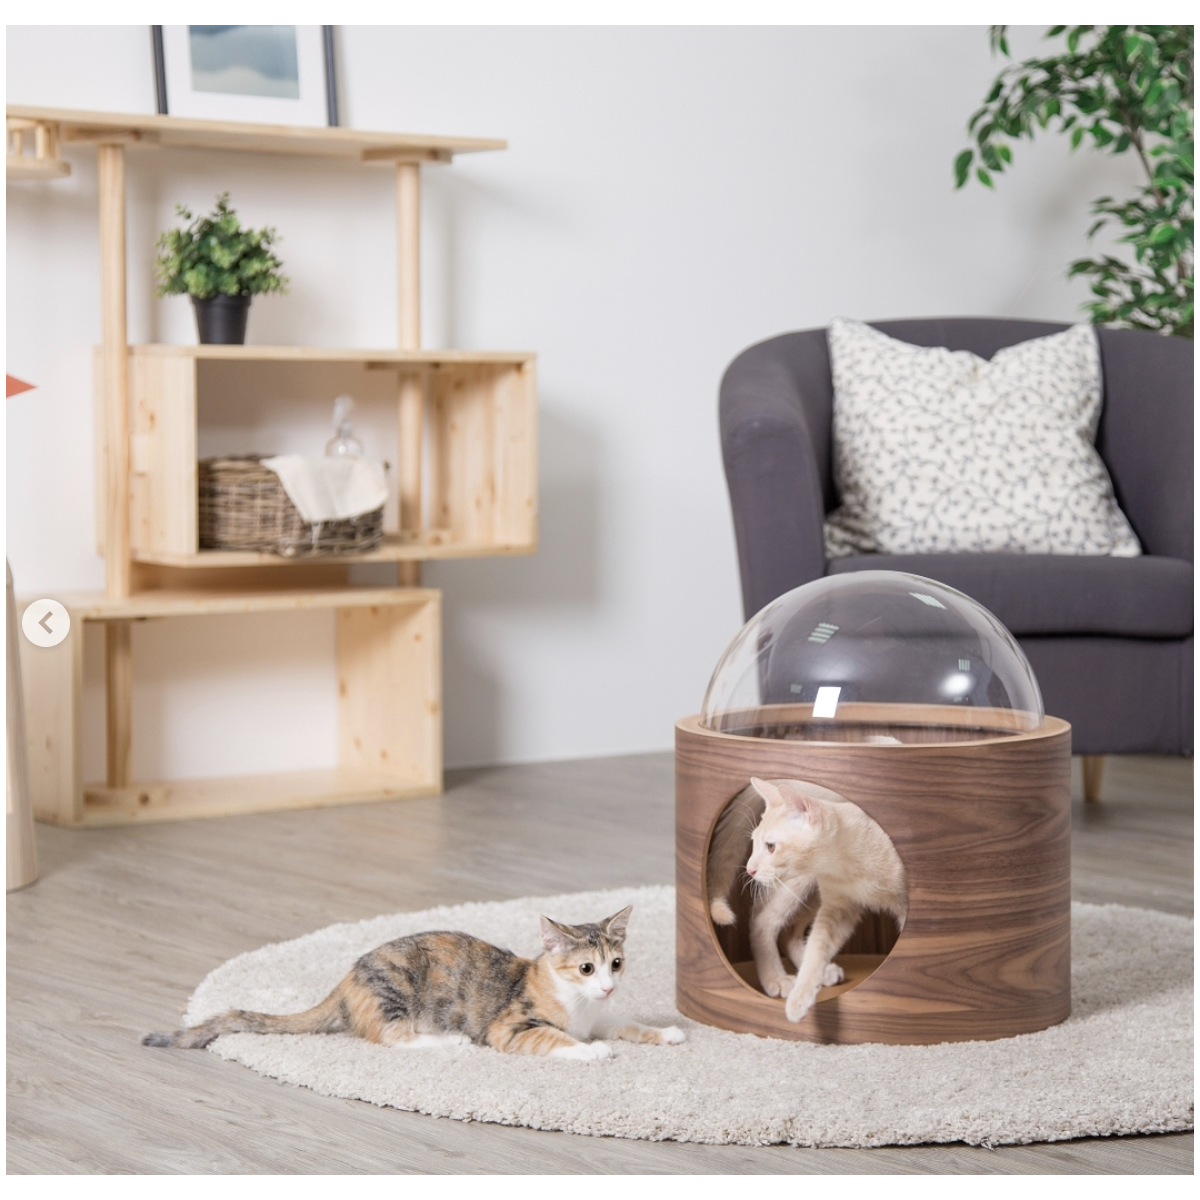 Spaceship Gamma Ultra Modern Cat Bed Or Wall Mounted Bed 236